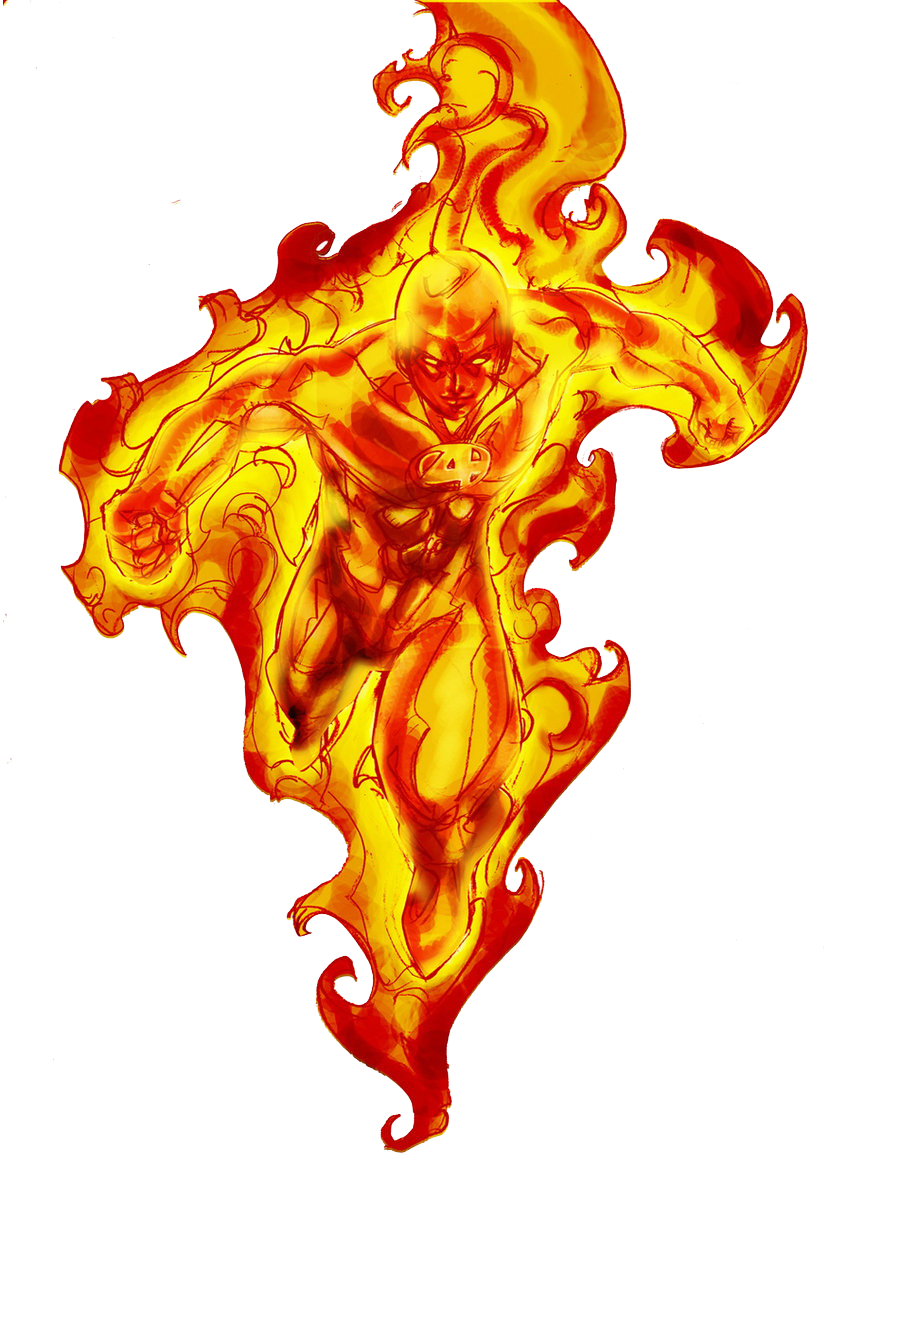 Human Torch Png Transparent Image - Humantorch, Transparent background PNG HD thumbnail